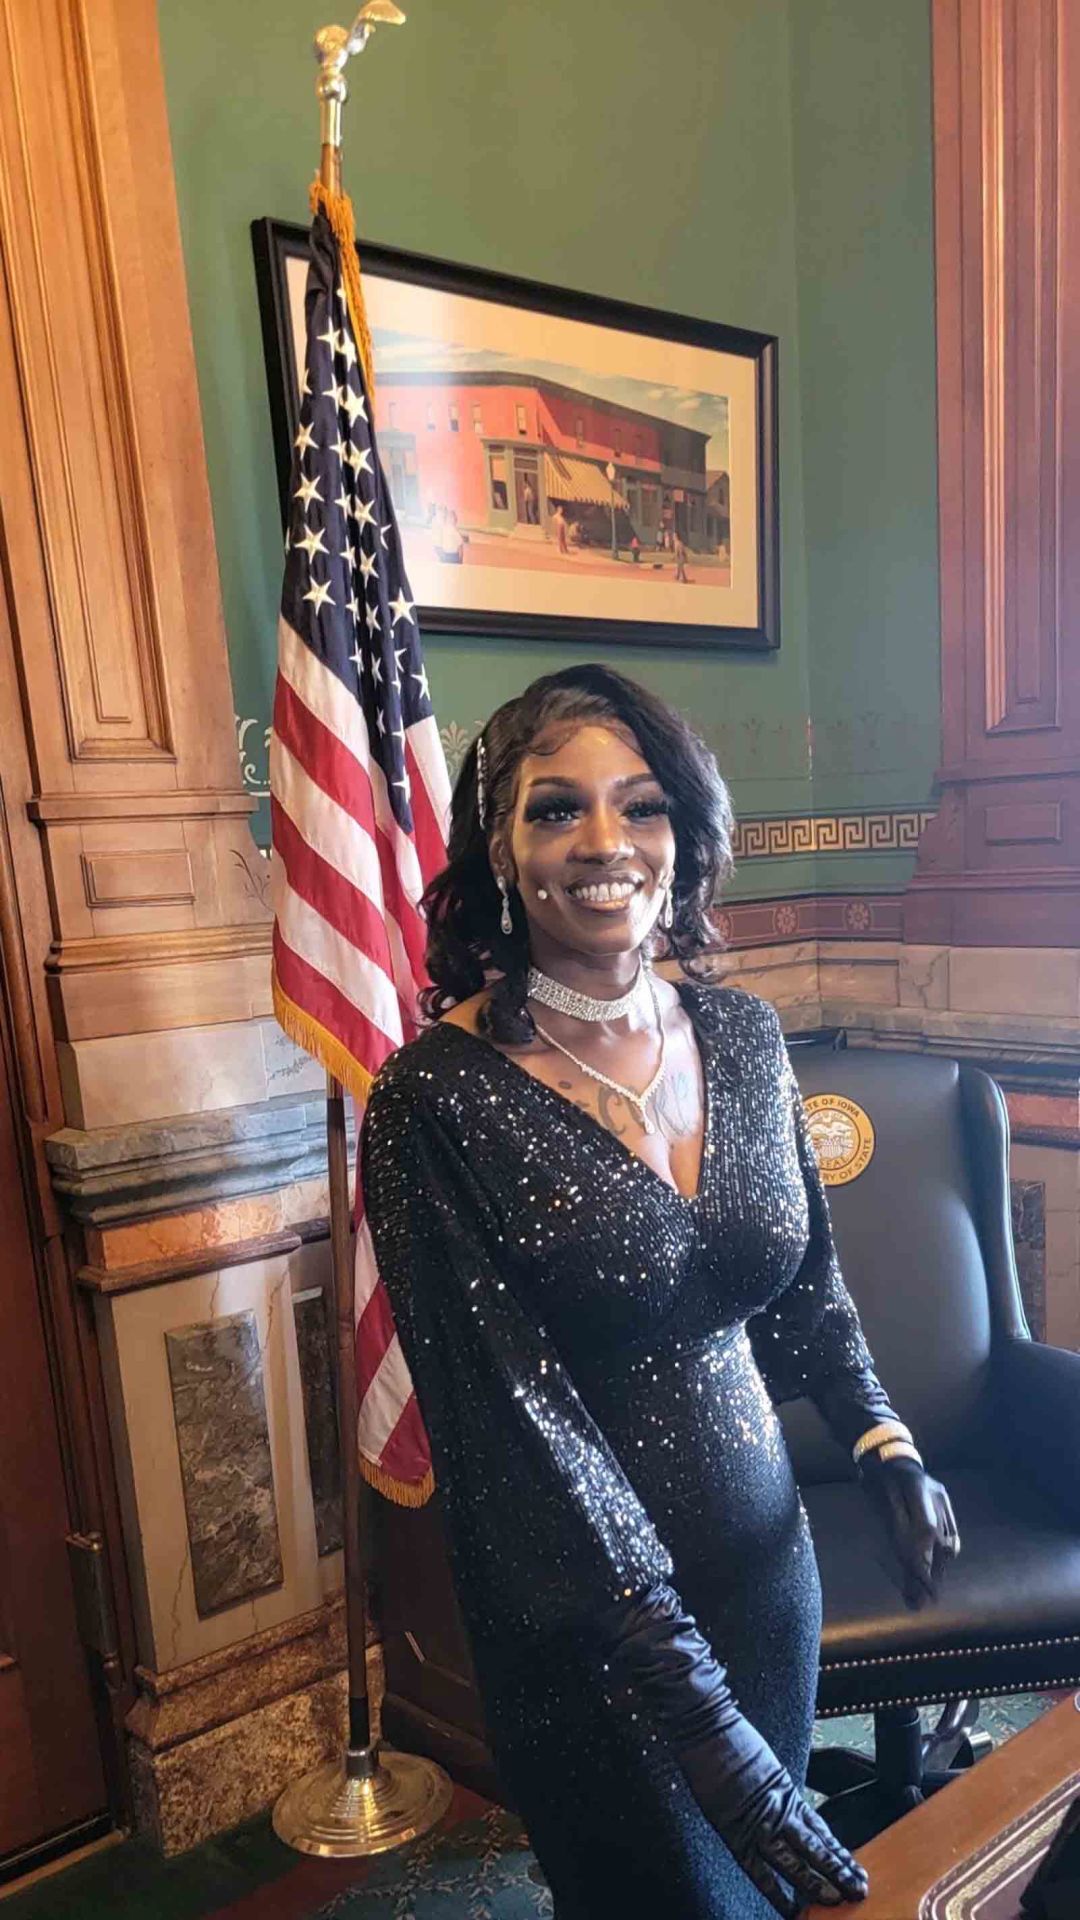 Erica Brewer, owner of Belle Allure Minkz and Boutique in Dubuque, in the Iowa Capitol in Des Moines on Thursday. Brewer was awarded the Deb Dalziel Woman Entrepreneur of the Year Award from America